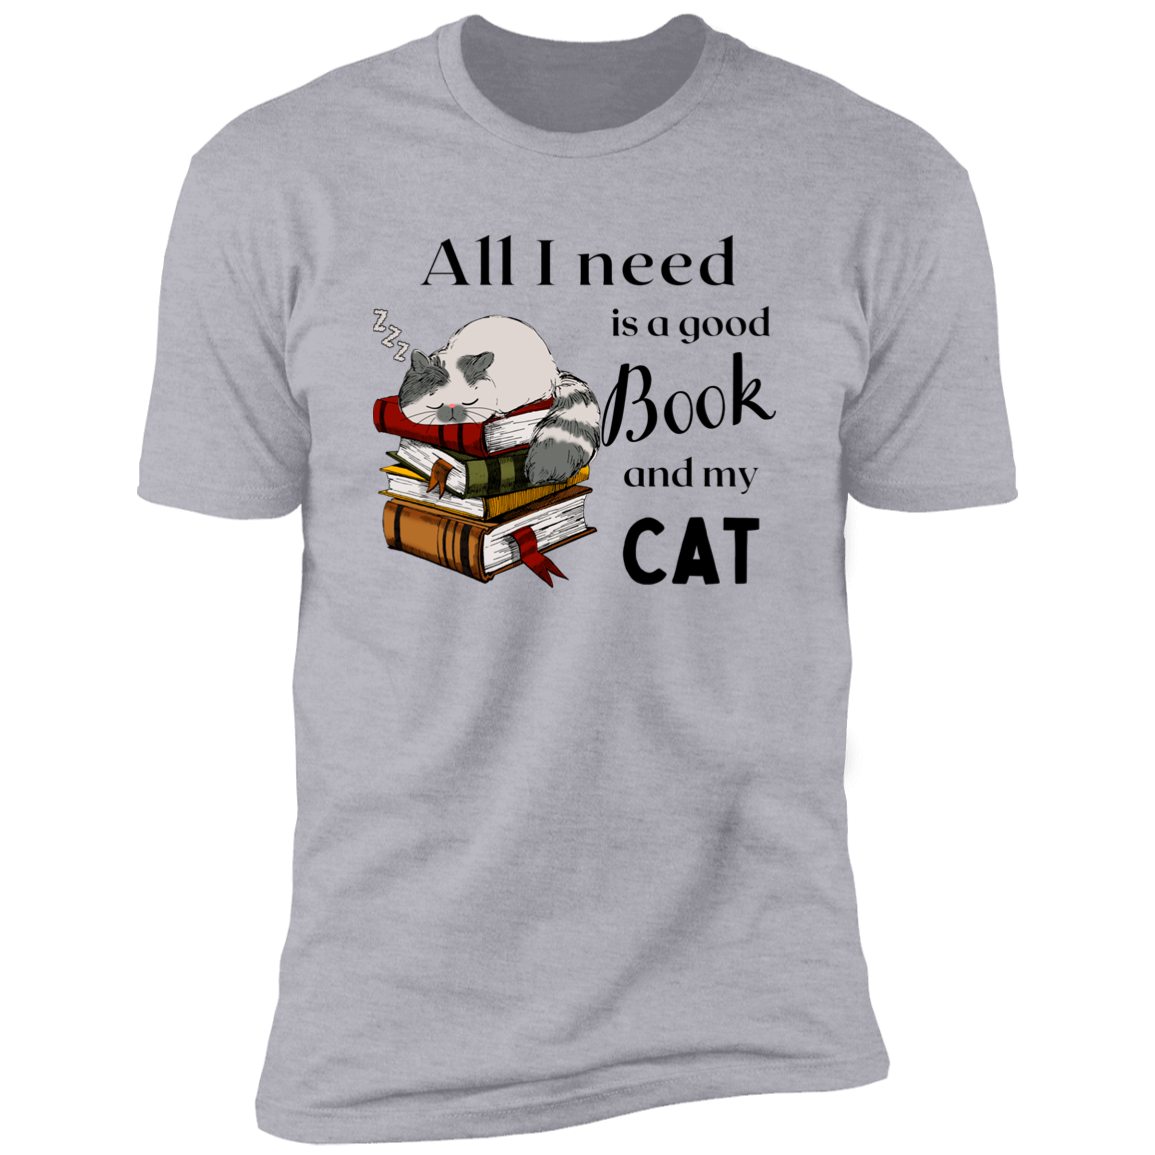 All I Need is a Good Book and My Cat t-shirt for humans, in light heather gray